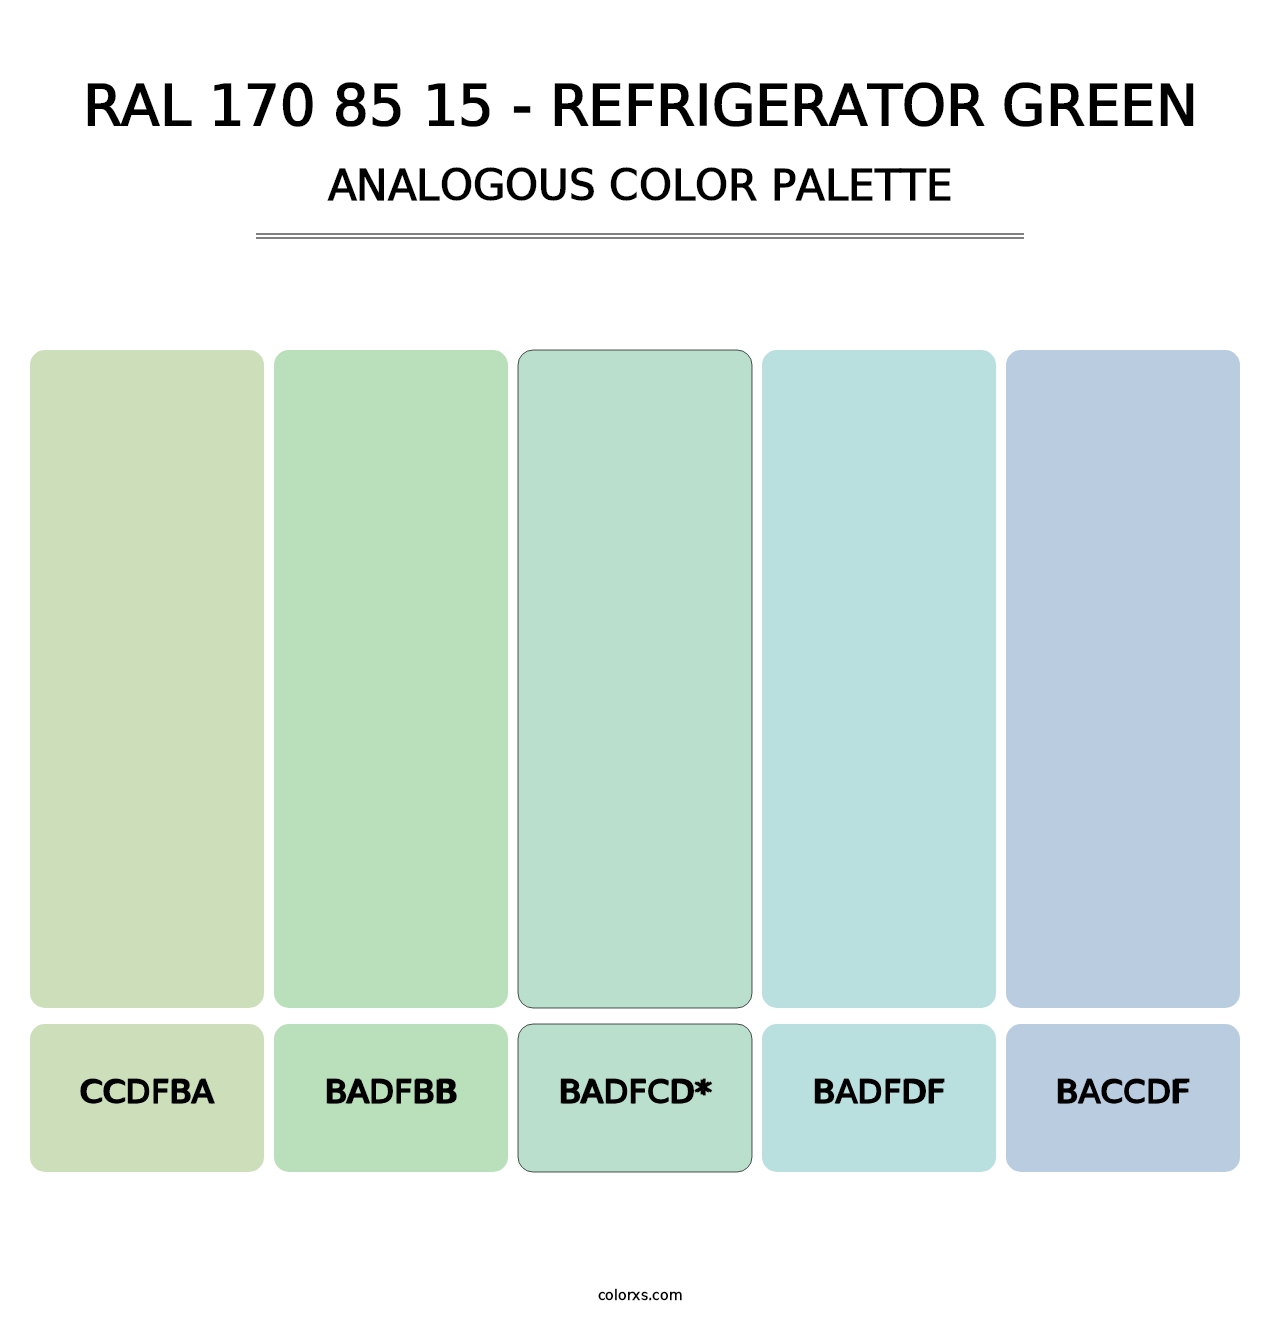 RAL 170 85 15 - Refrigerator Green - Analogous Color Palette